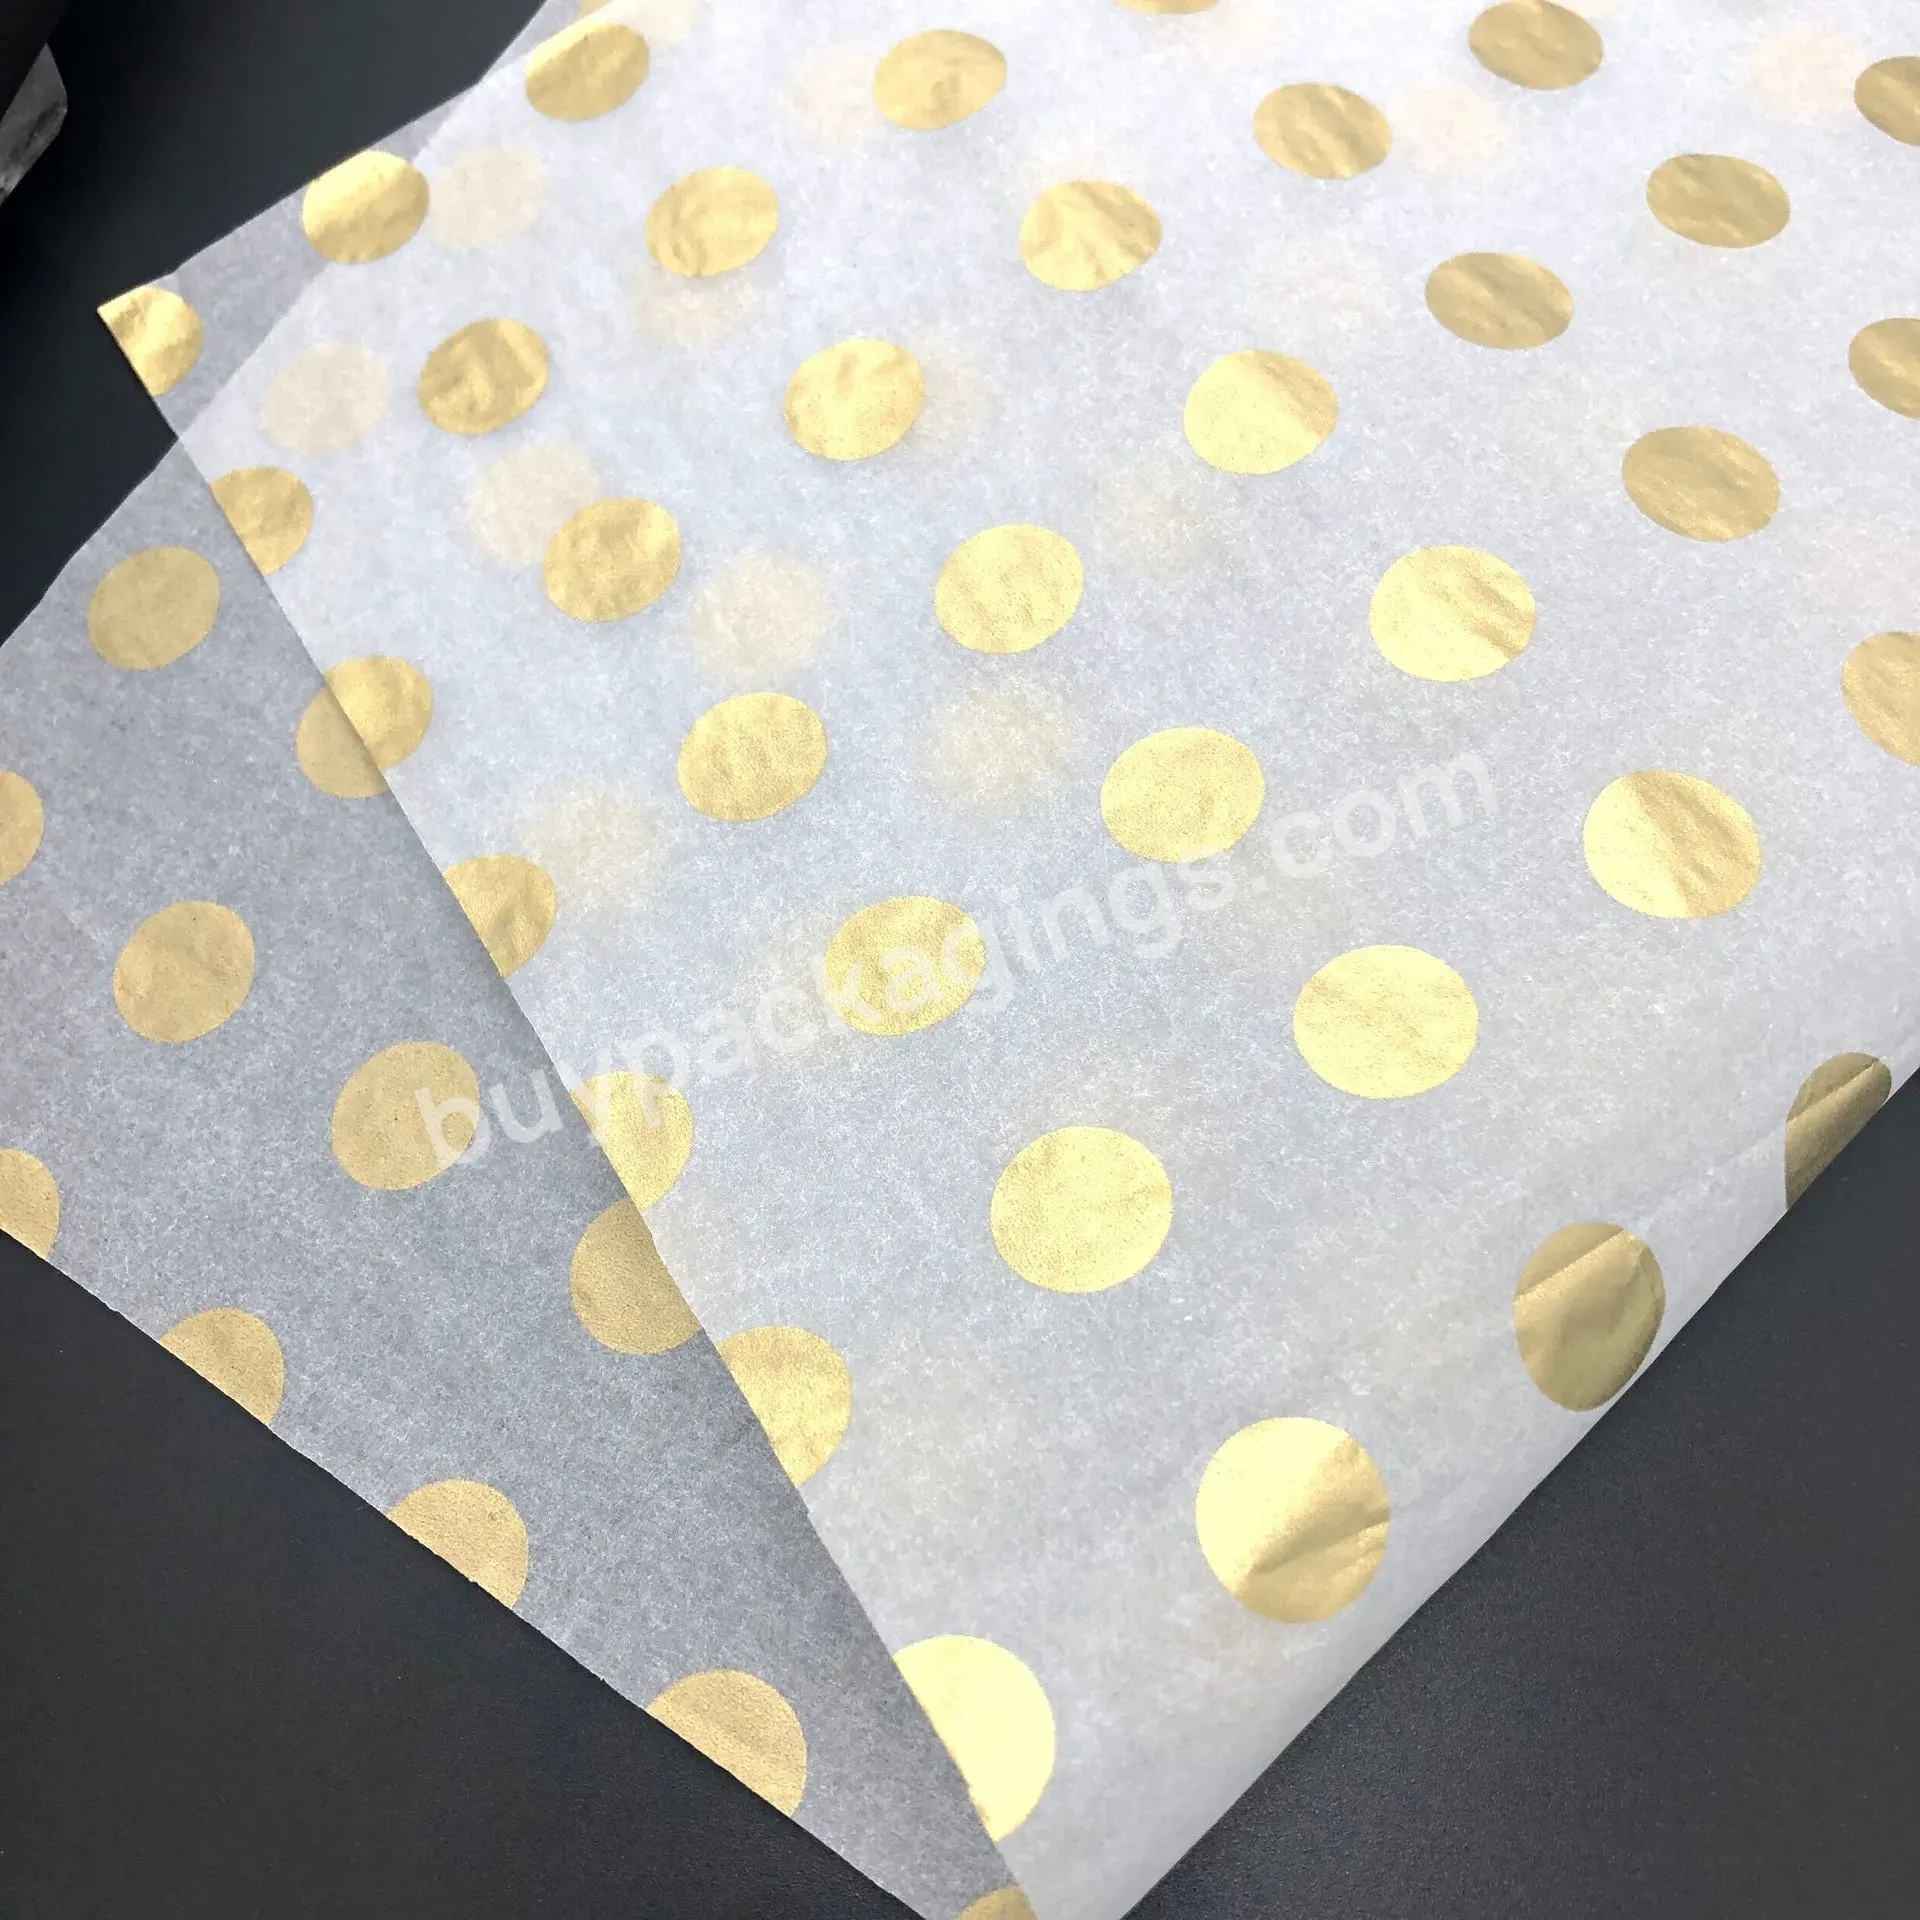 Ready To Ship 17g White Tissue Silk Paper With Gold Circle Printed Logo For Clothing Wrapping - Buy White Tissue Silk Paper,Tissue Paper,Silk Paper.